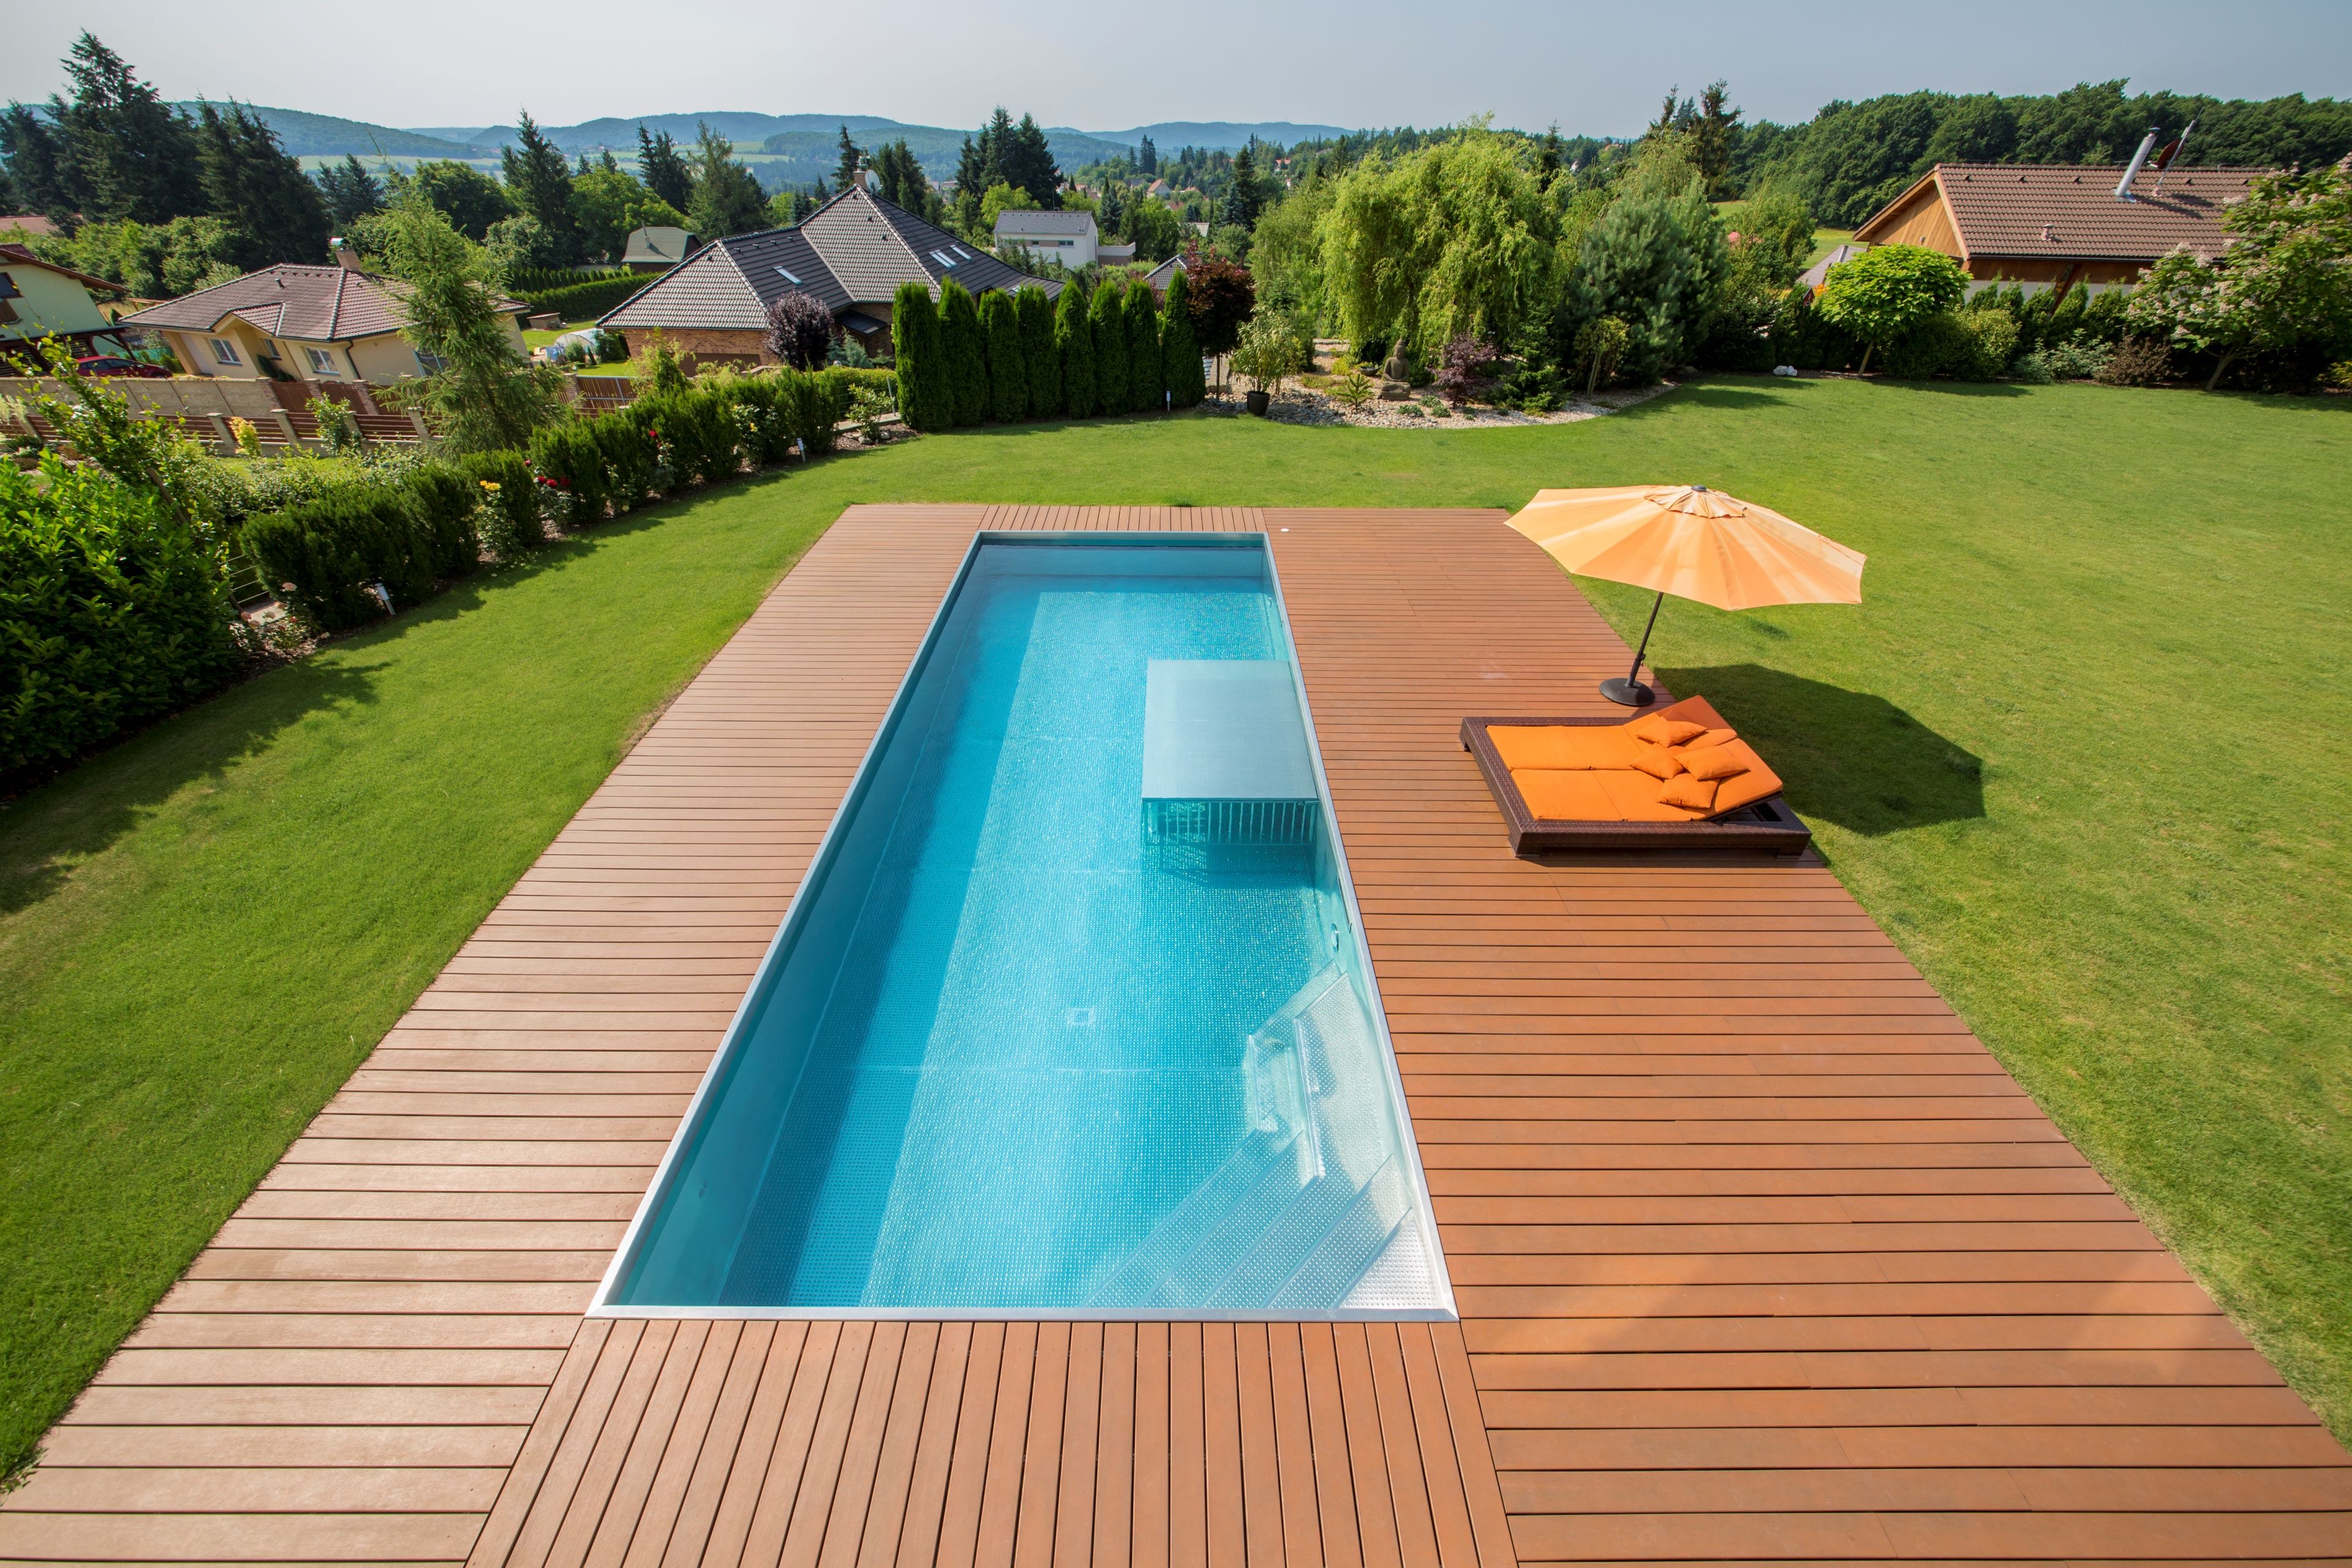 IMAGINOX Stainless-Steel Outdoor Pool for whole Family